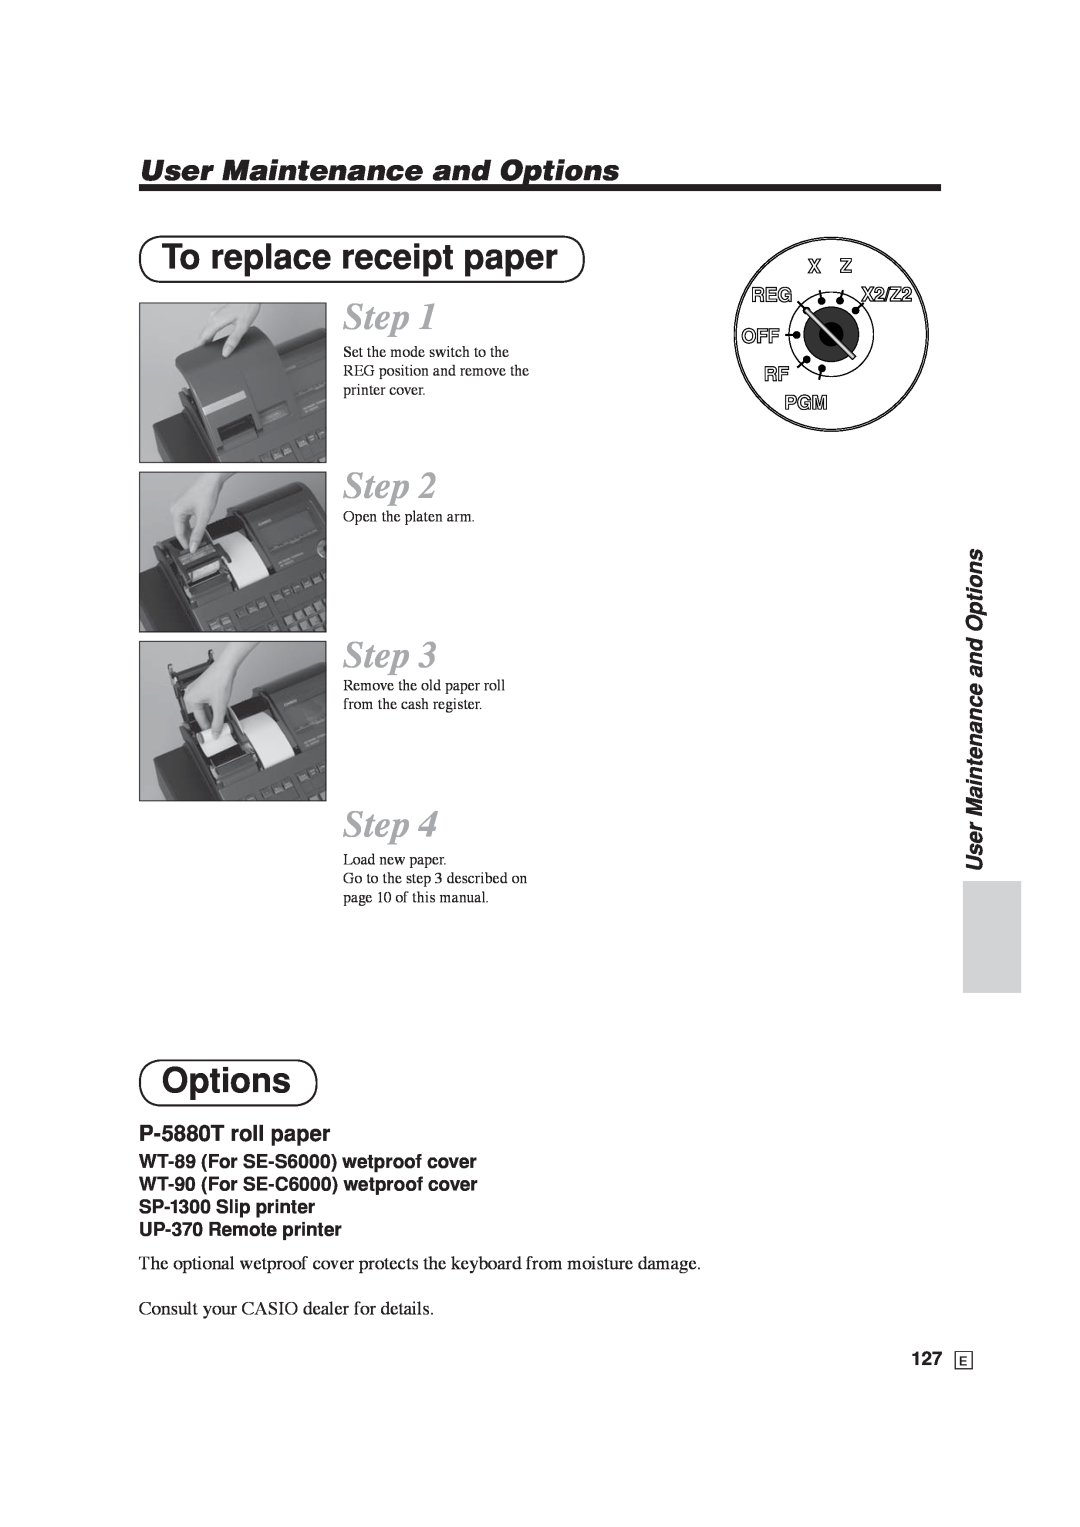 Casio SE-C6000, SE-S6000 user manual To replace receipt paper, P-5880T roll paper, User Maintenance and Options, Step 